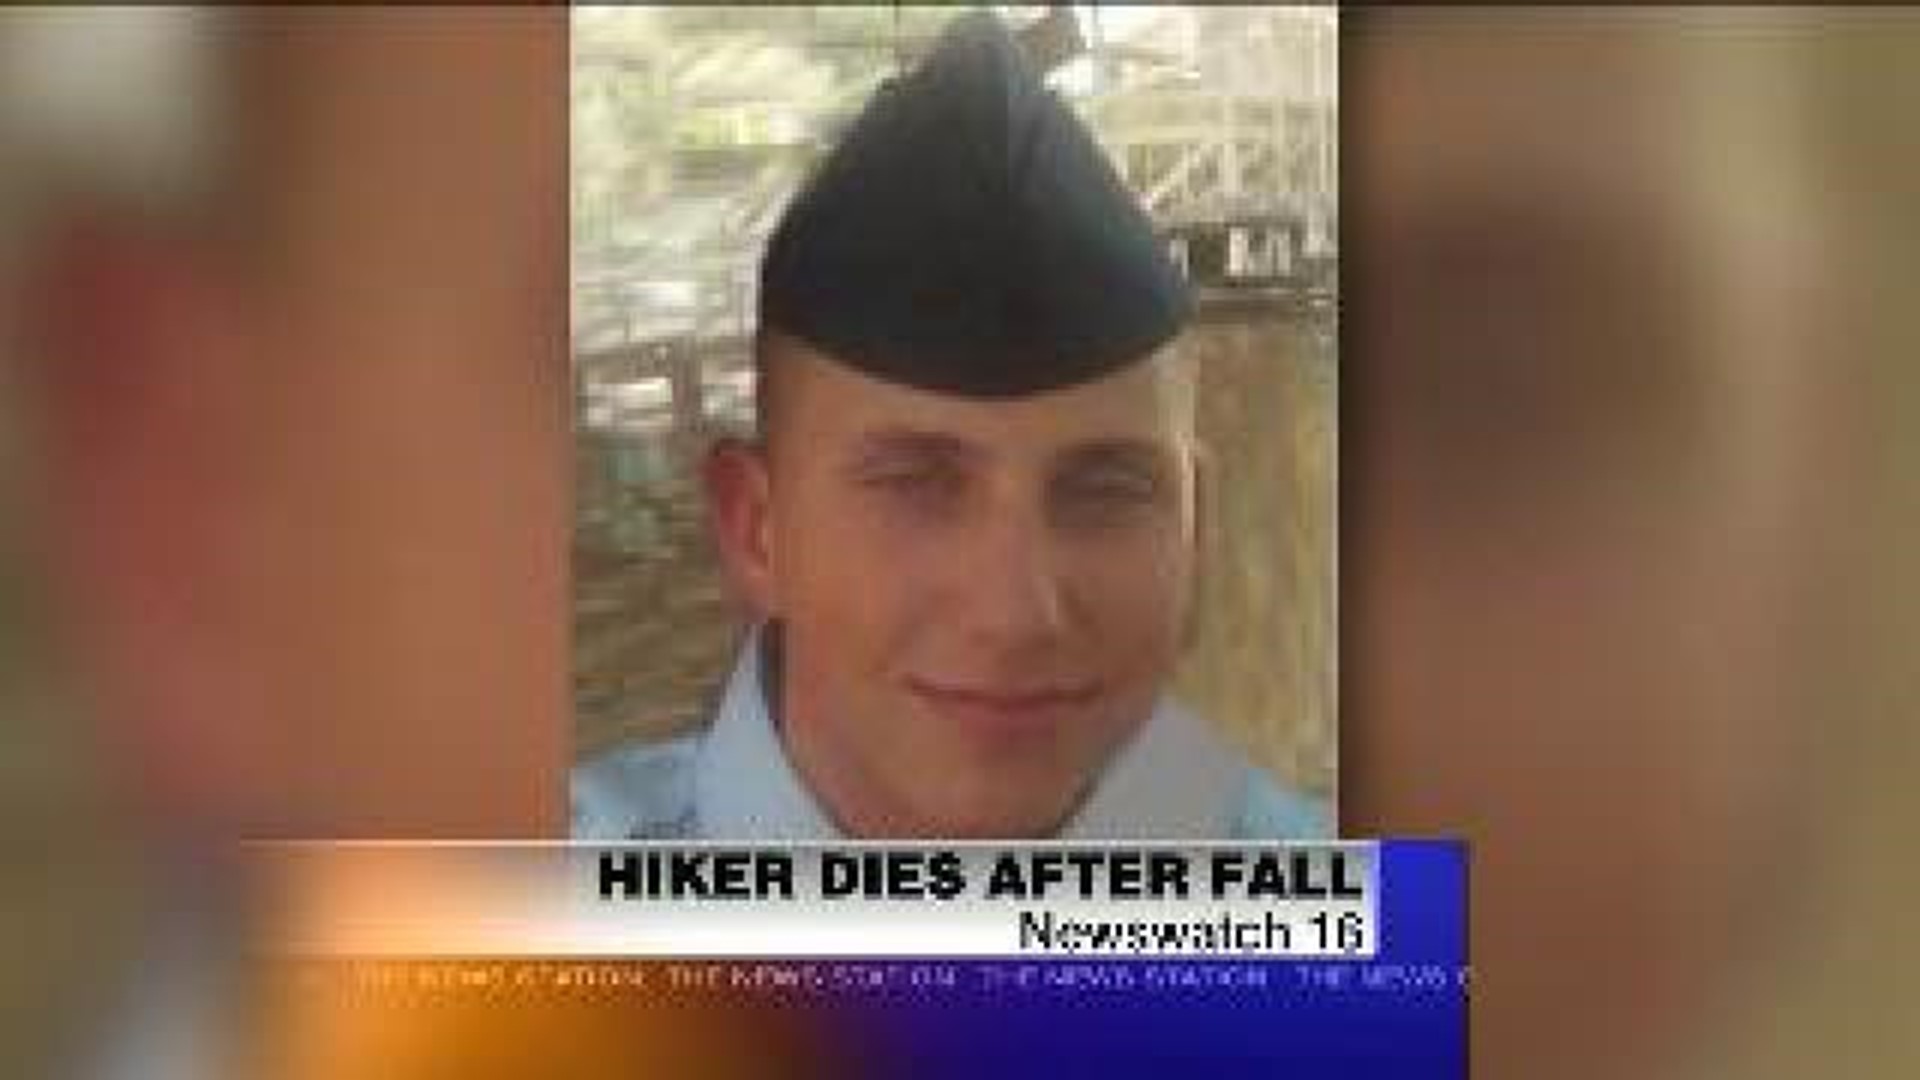 Investigators Warn Of Dangers After Hiker Dies From Fall